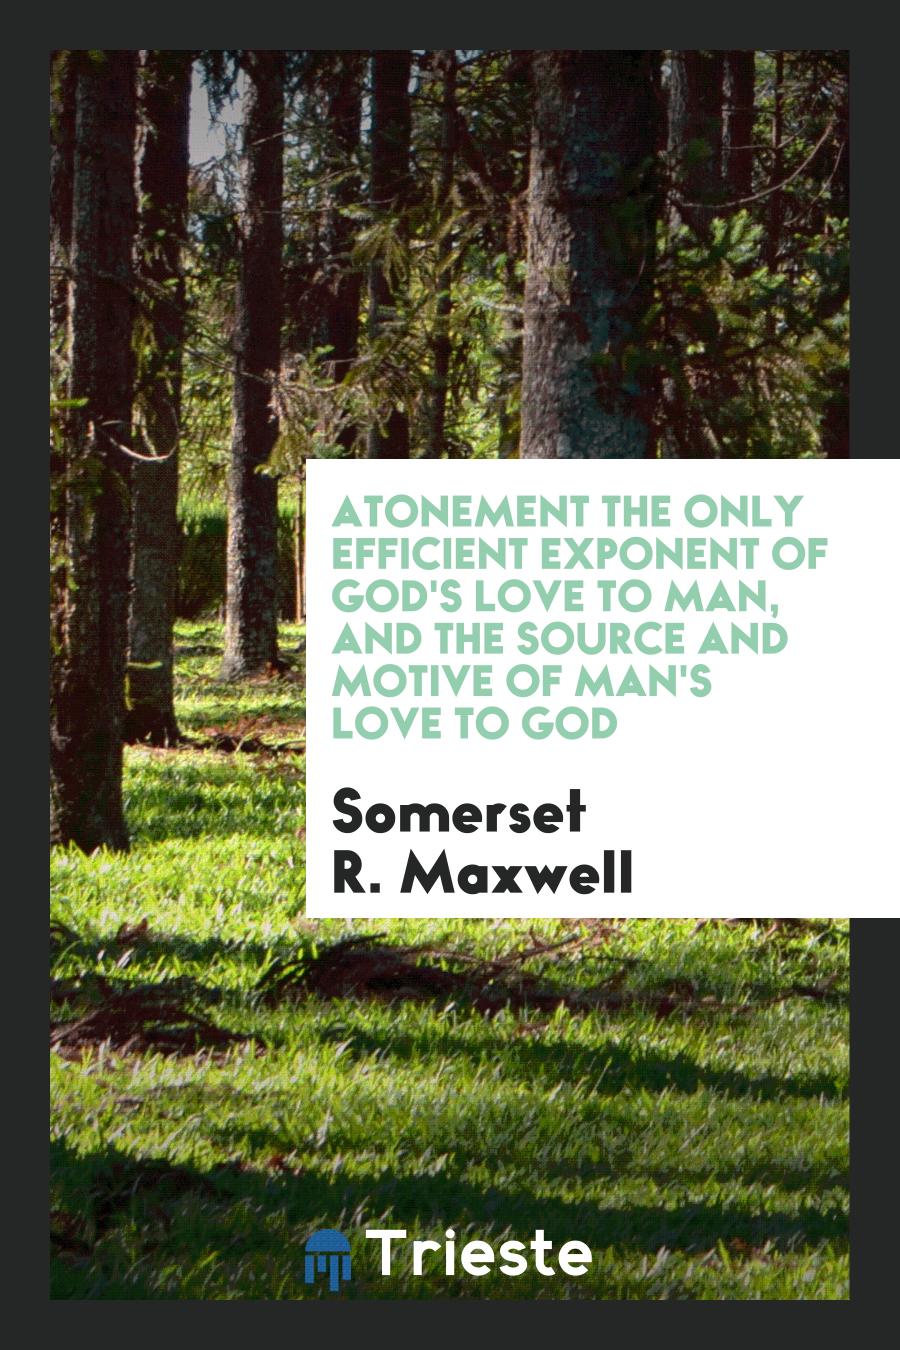 Atonement the only efficient exponent of God's love to man, and the source and motive of man's love to God